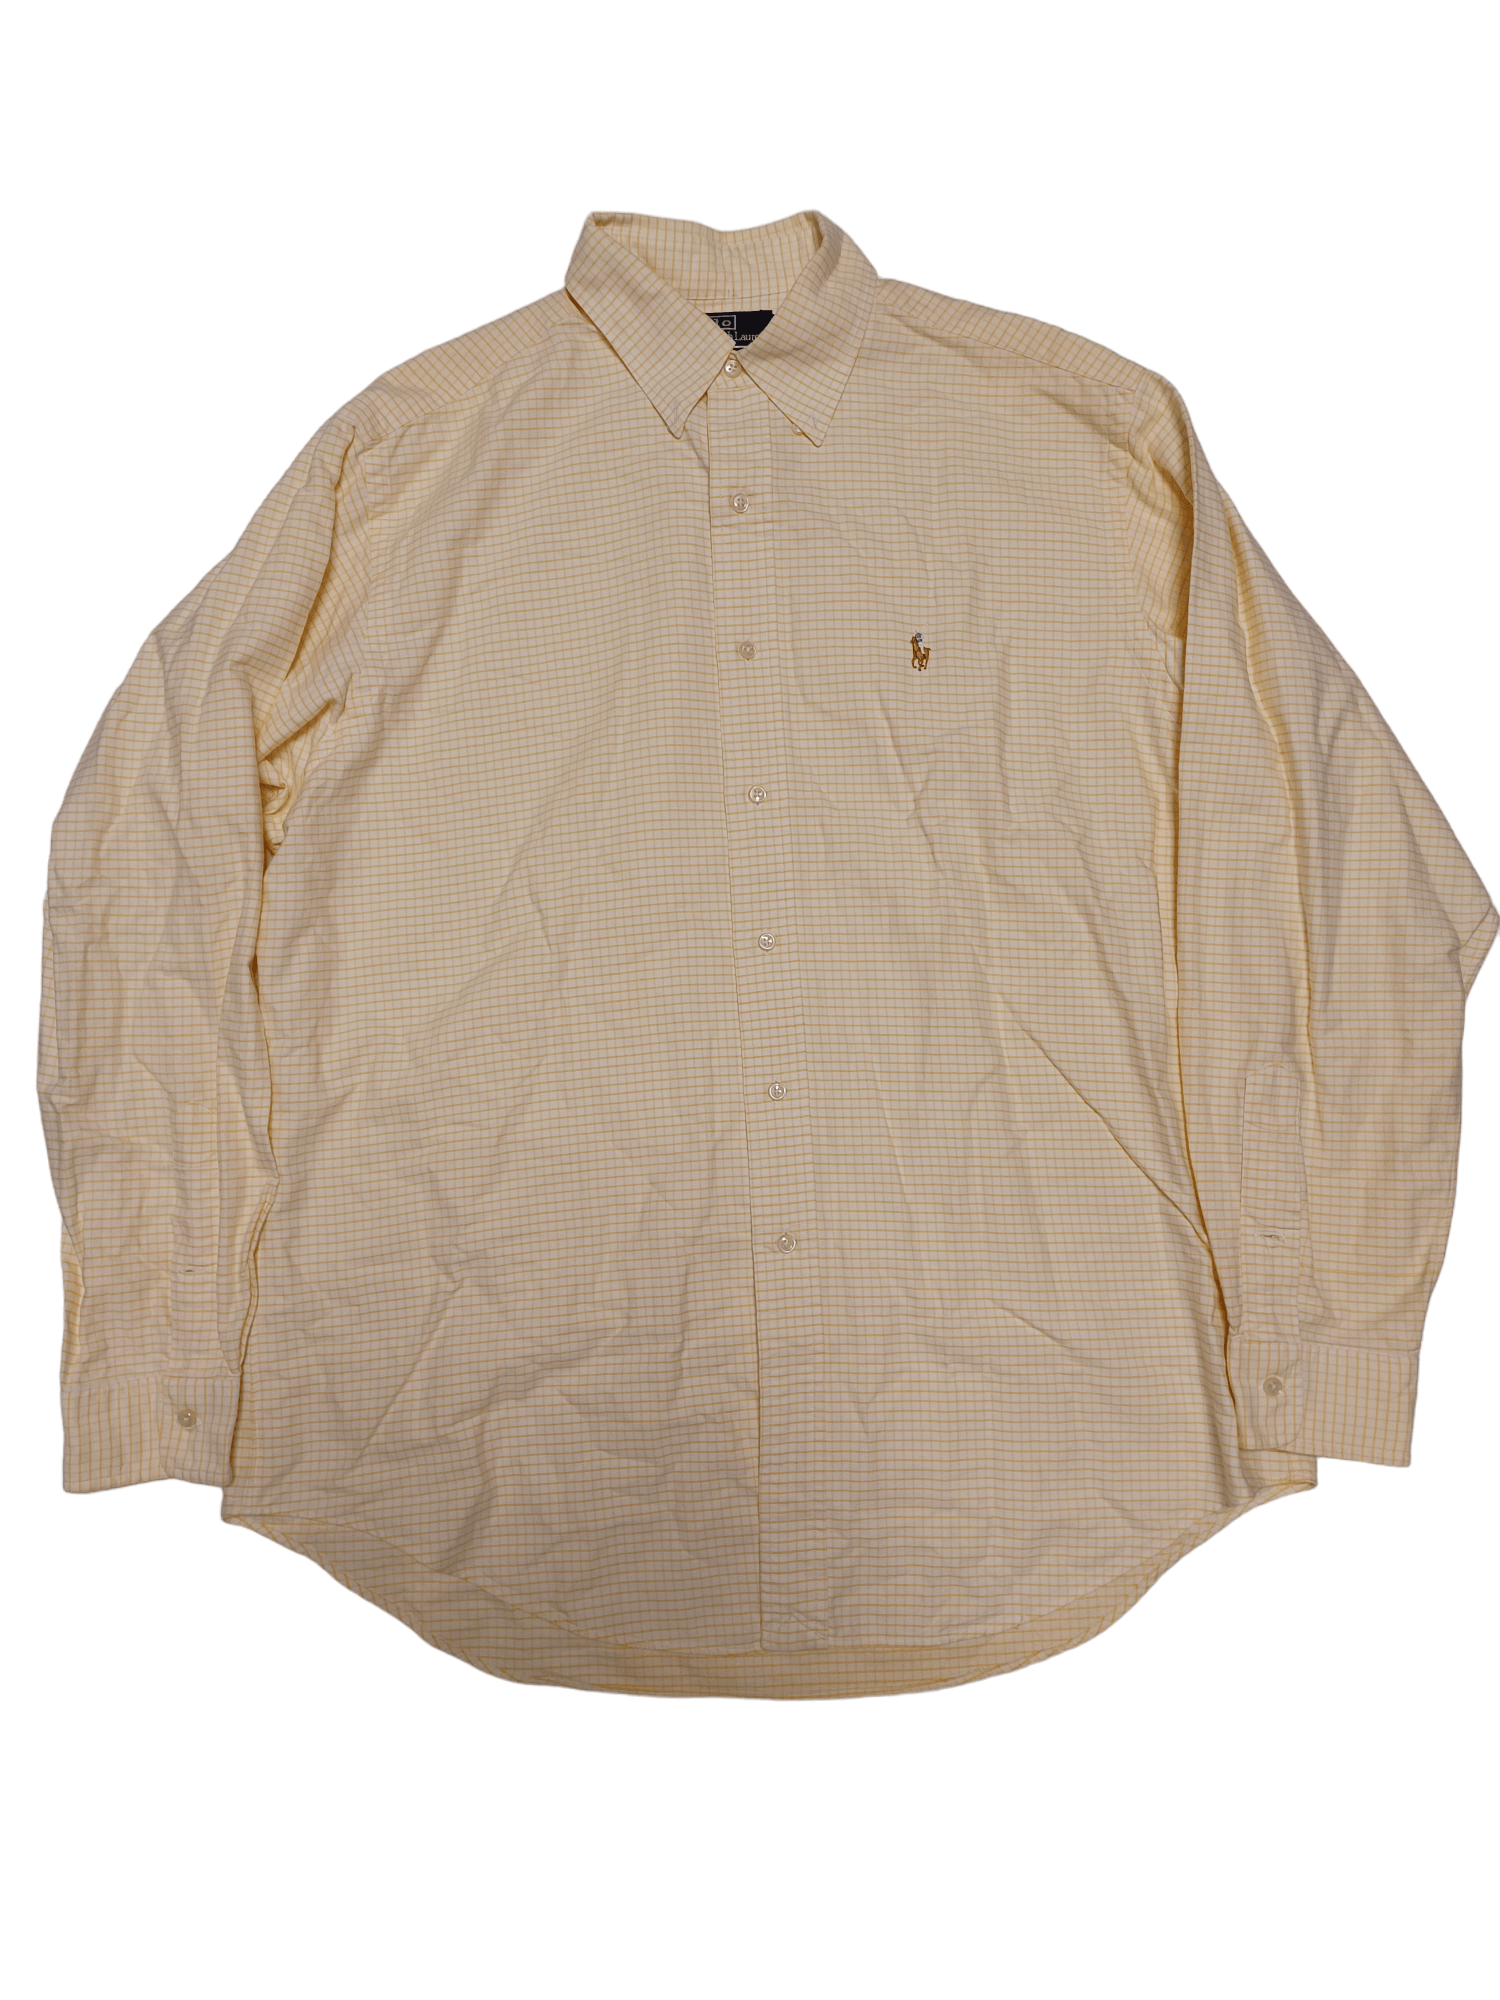 Pre-owned 1990x Clothing X Polo Ralph Lauren Made In Hong Kong Heavy Cotton Early 90's Plr Shirt In Checkered